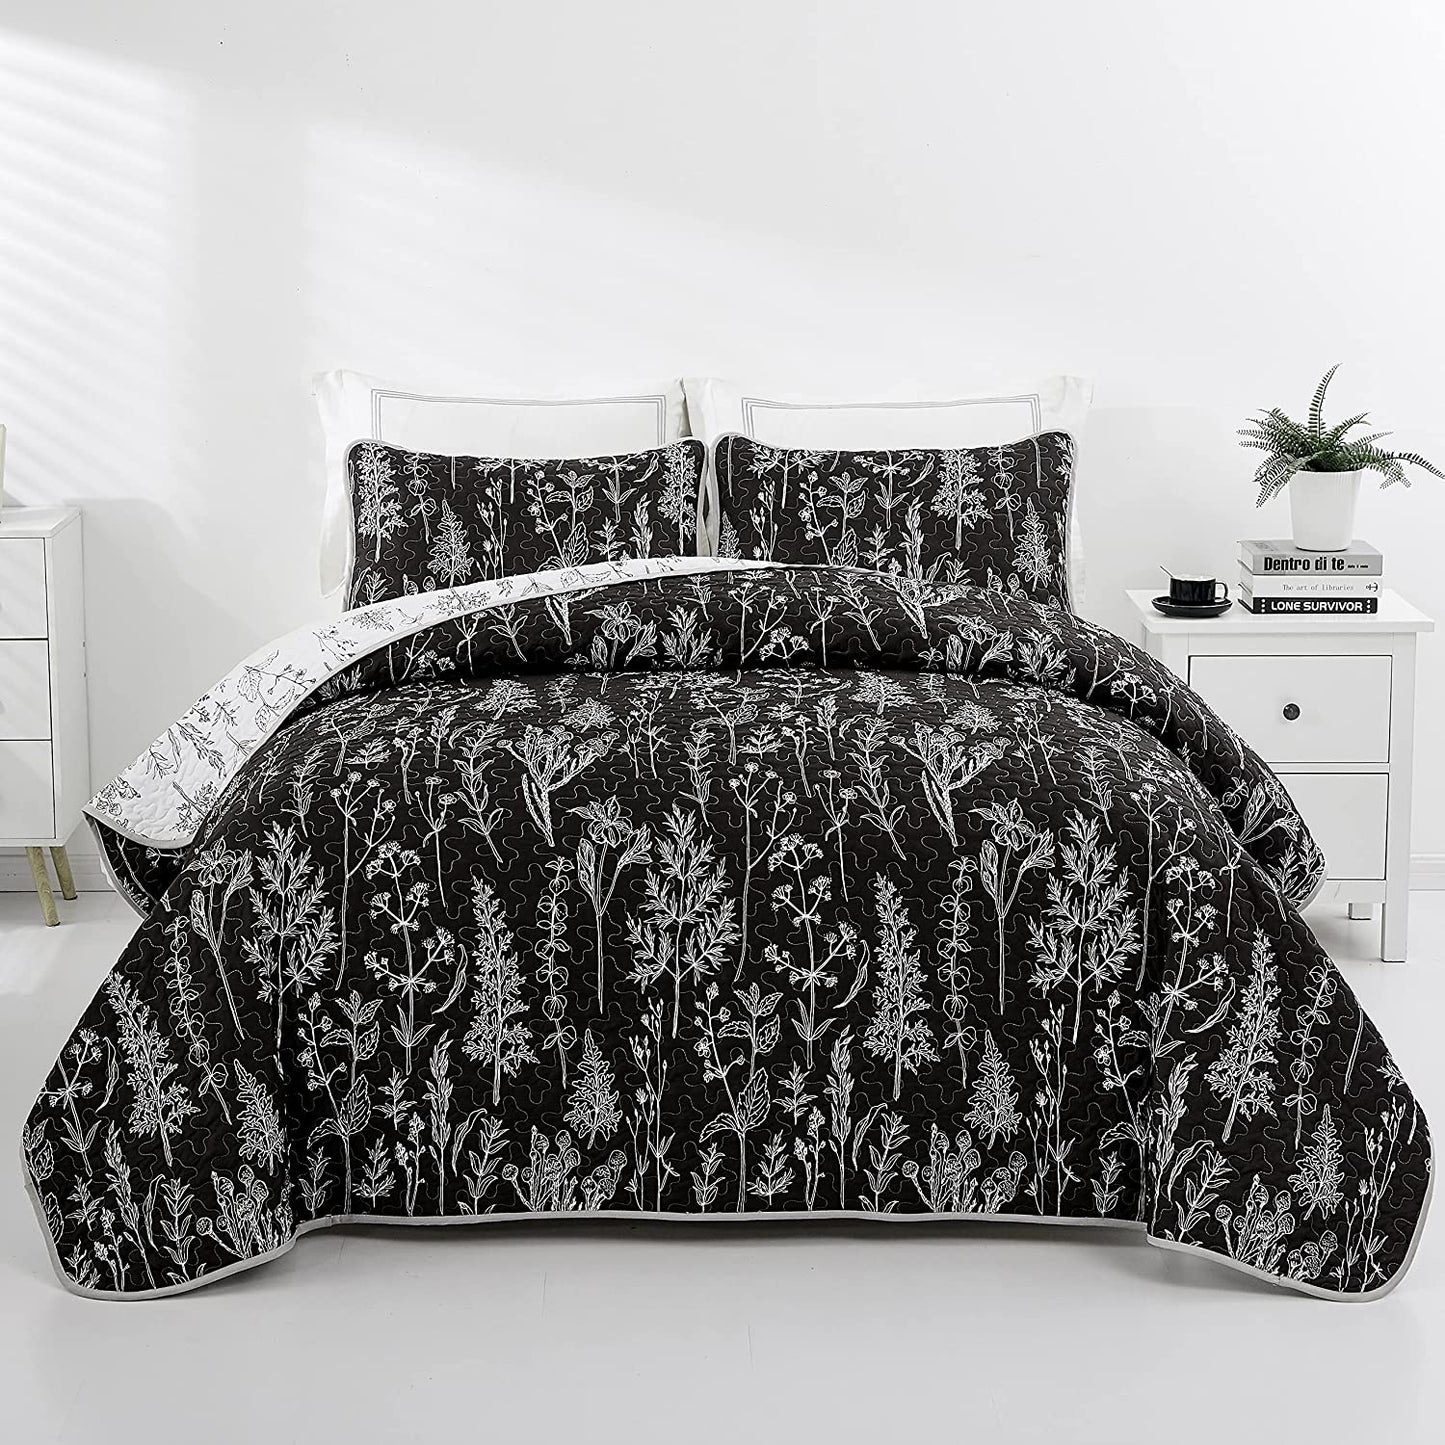 Black and White Quilt Set 3 Pieces Flowers Botanical Plant Reversible Summer Lightweight Microfiber Bedspread with 2 Pillowcases